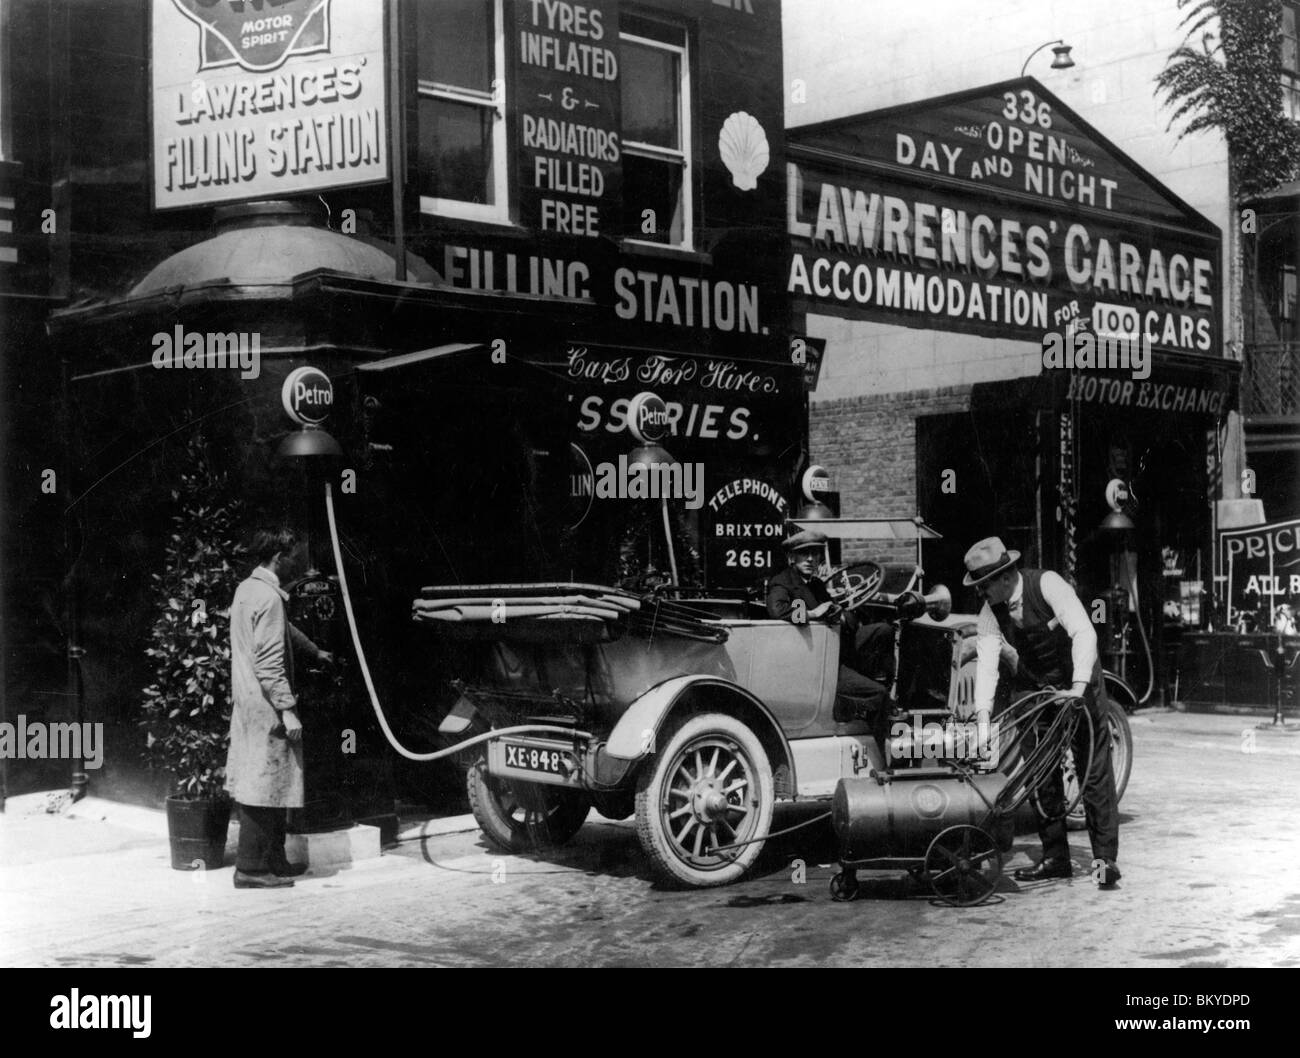 Lawrence's garage forecourt in the early 1920's, London. Stock Photo